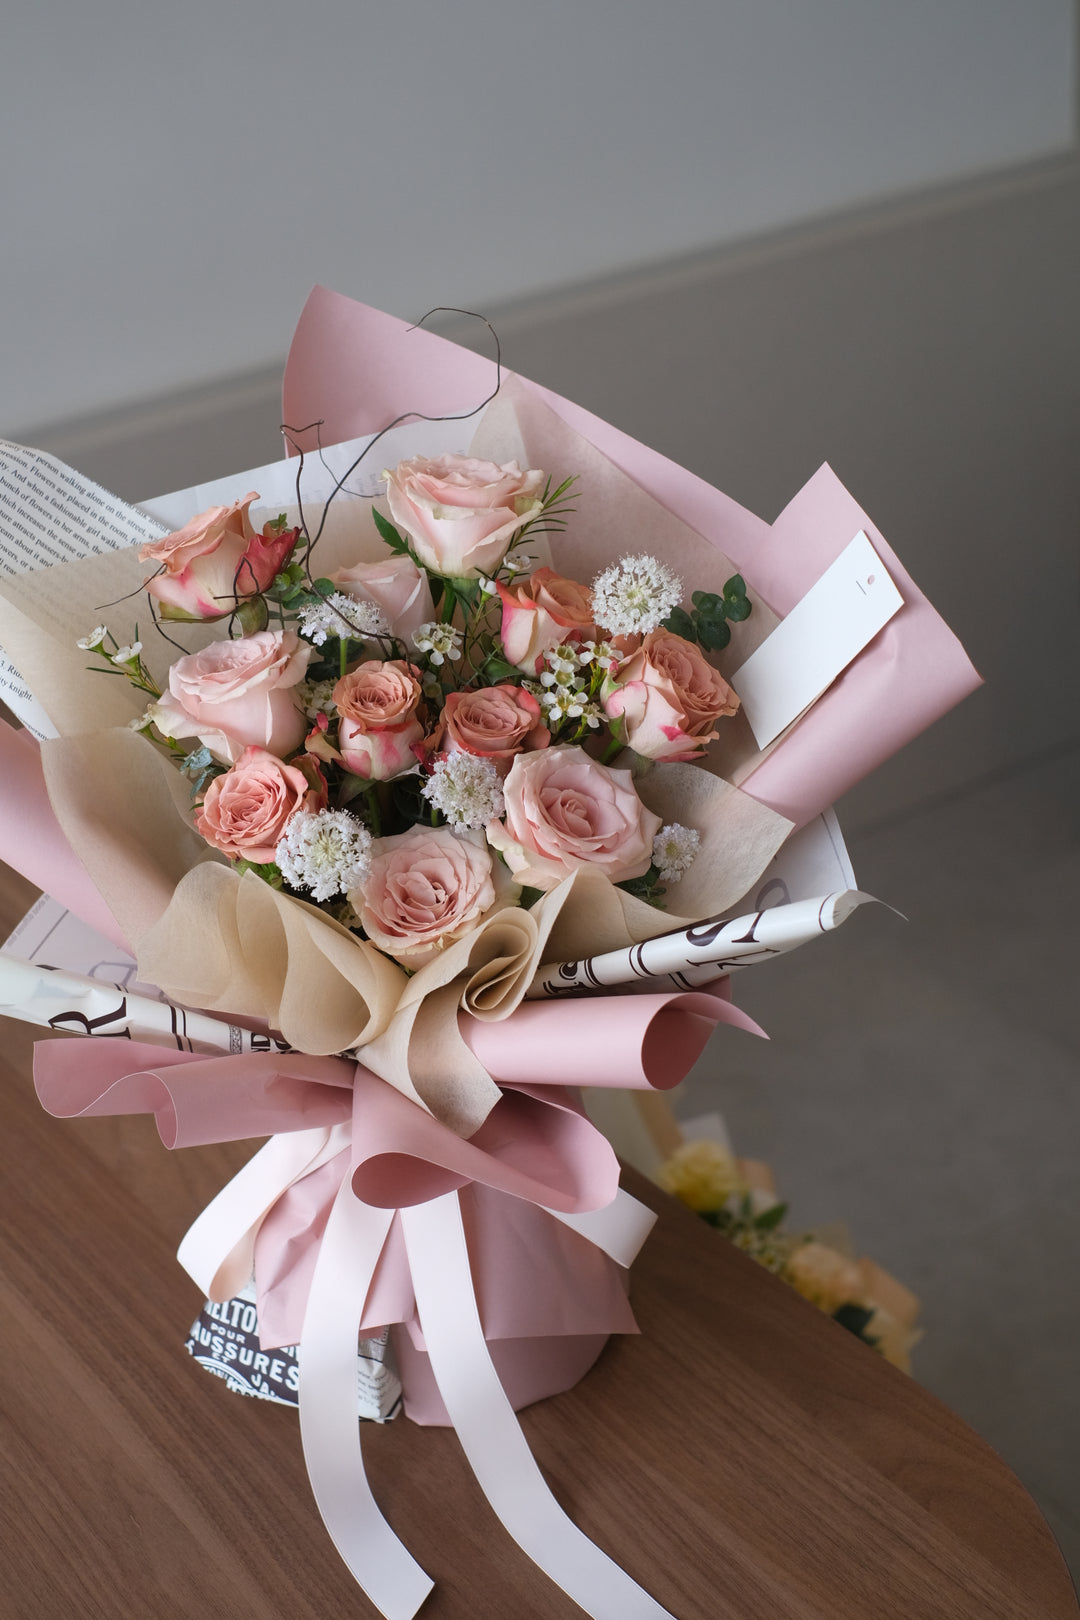 cappuccino roses bouquet of flowers delivery, bouquet of rose in with pink wraping, white pincushions florist bukit mertajam 